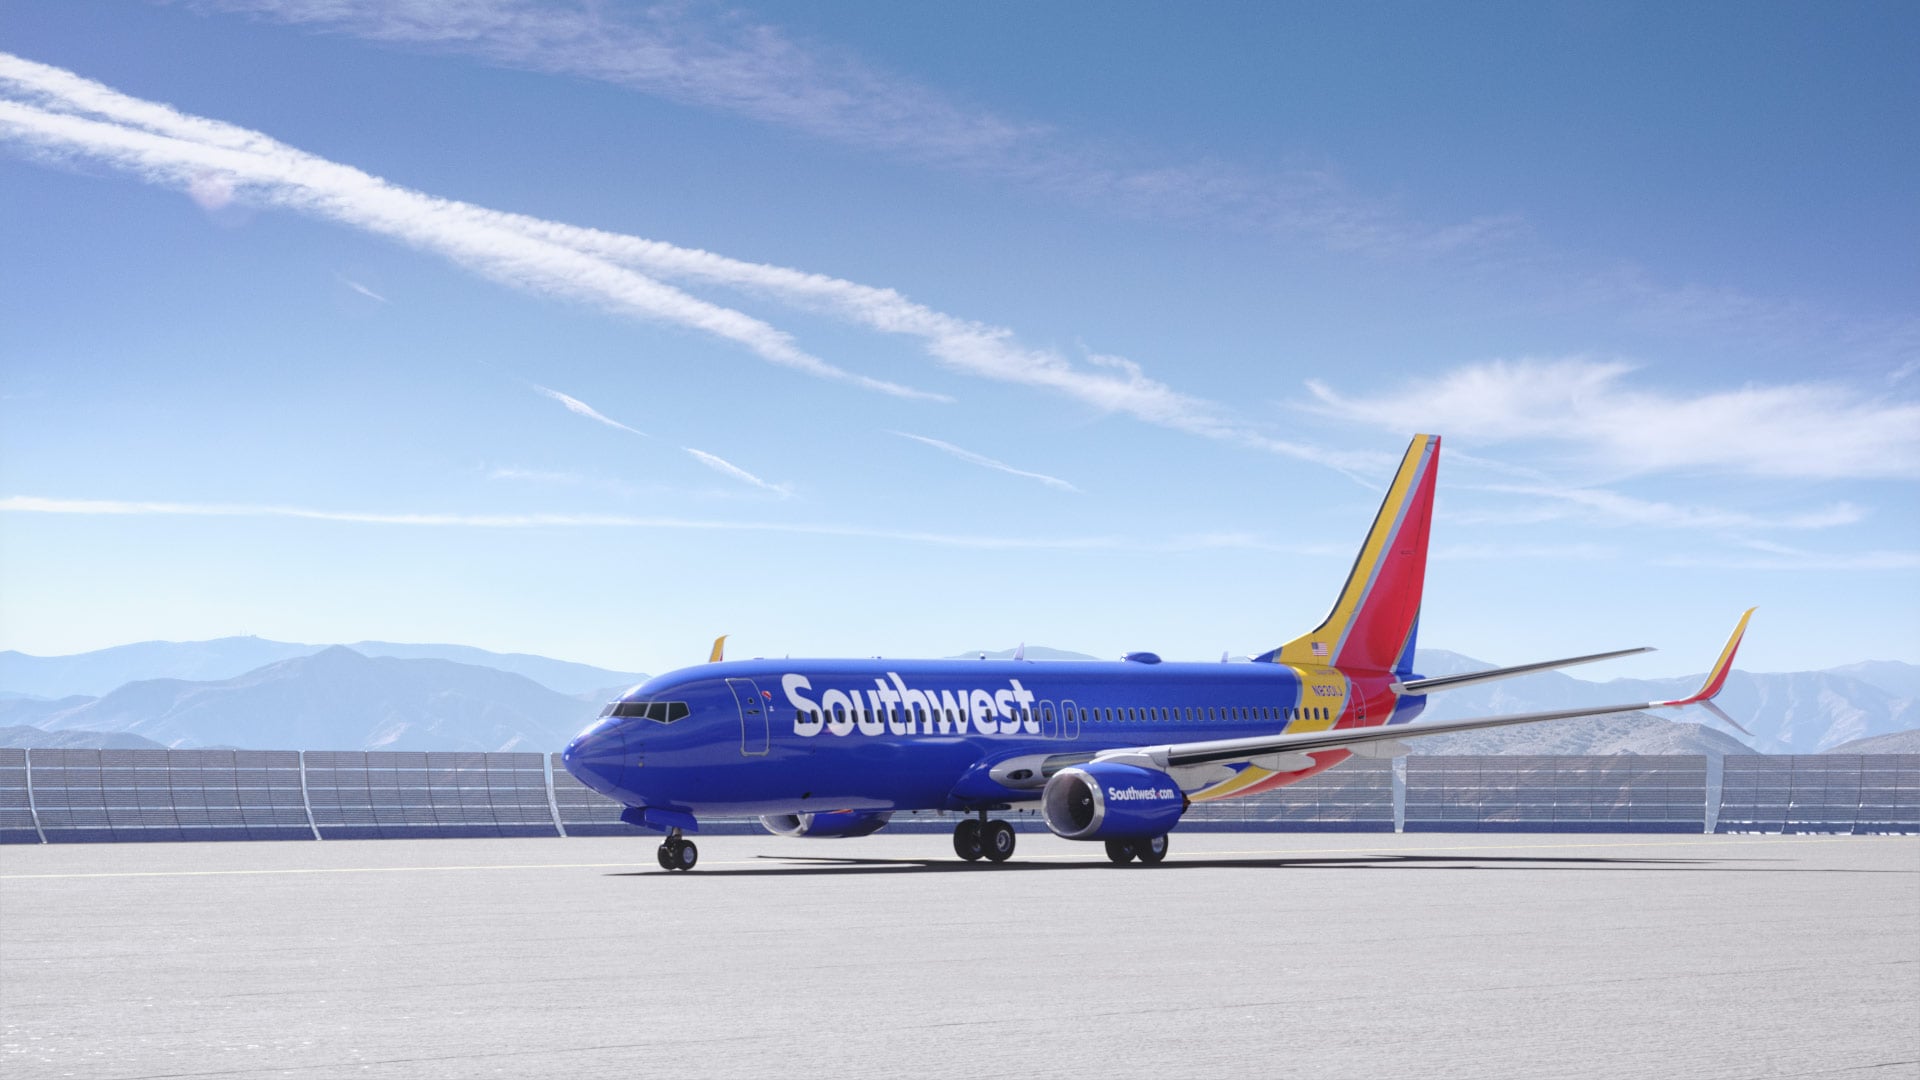 A photorealistic 3D rendering of a Southwest Airlines aircraft